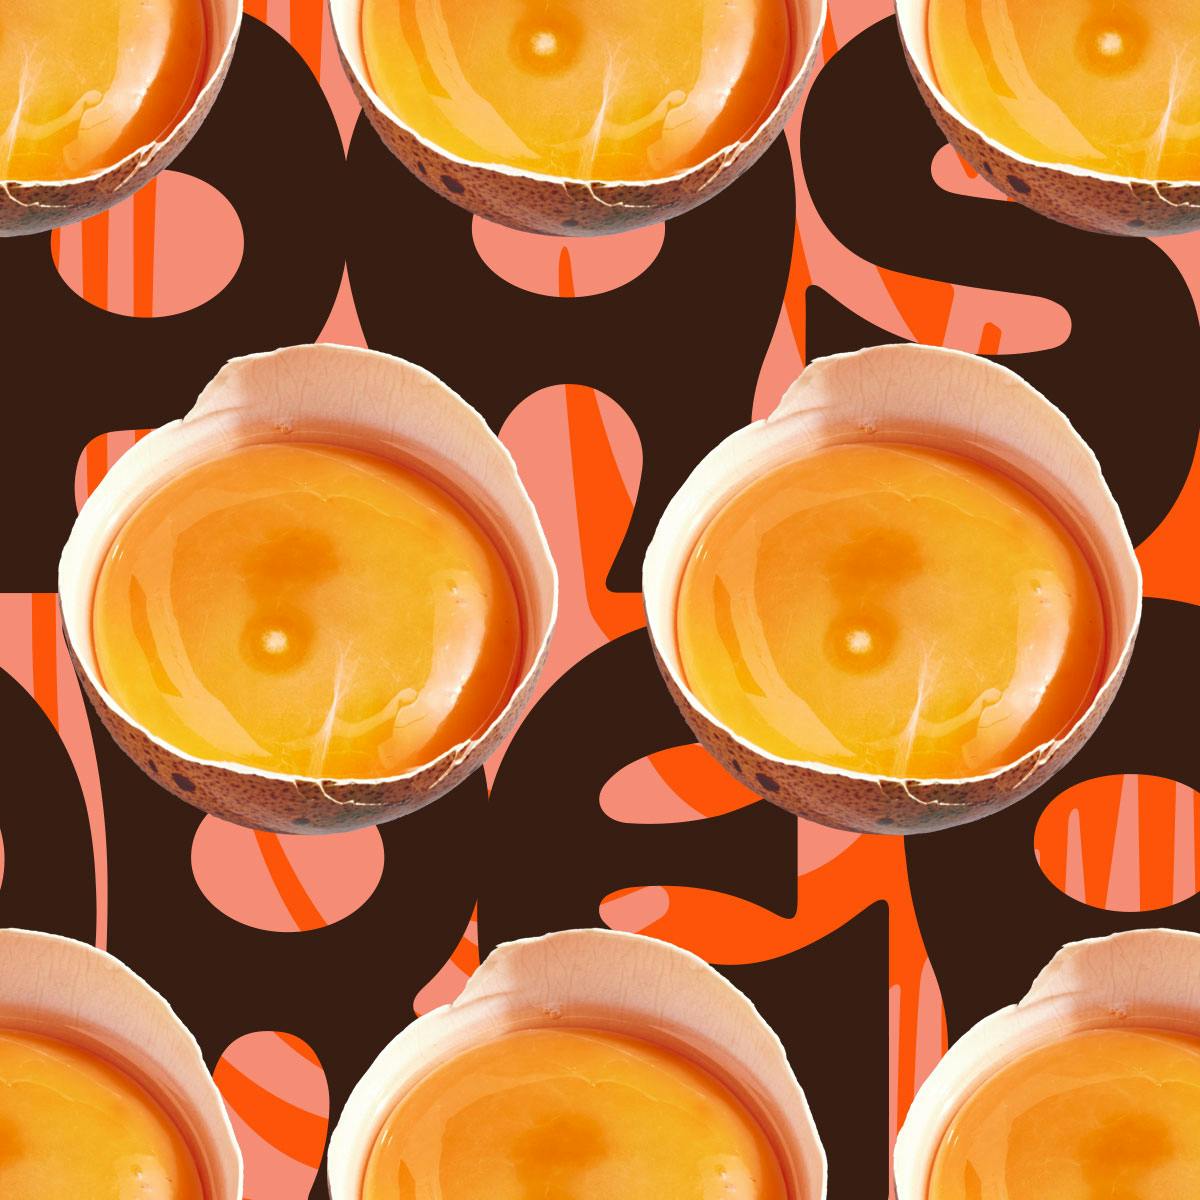 Image shows a cut-out graphic of egg yolks inside a shell, tiled over a patterned background